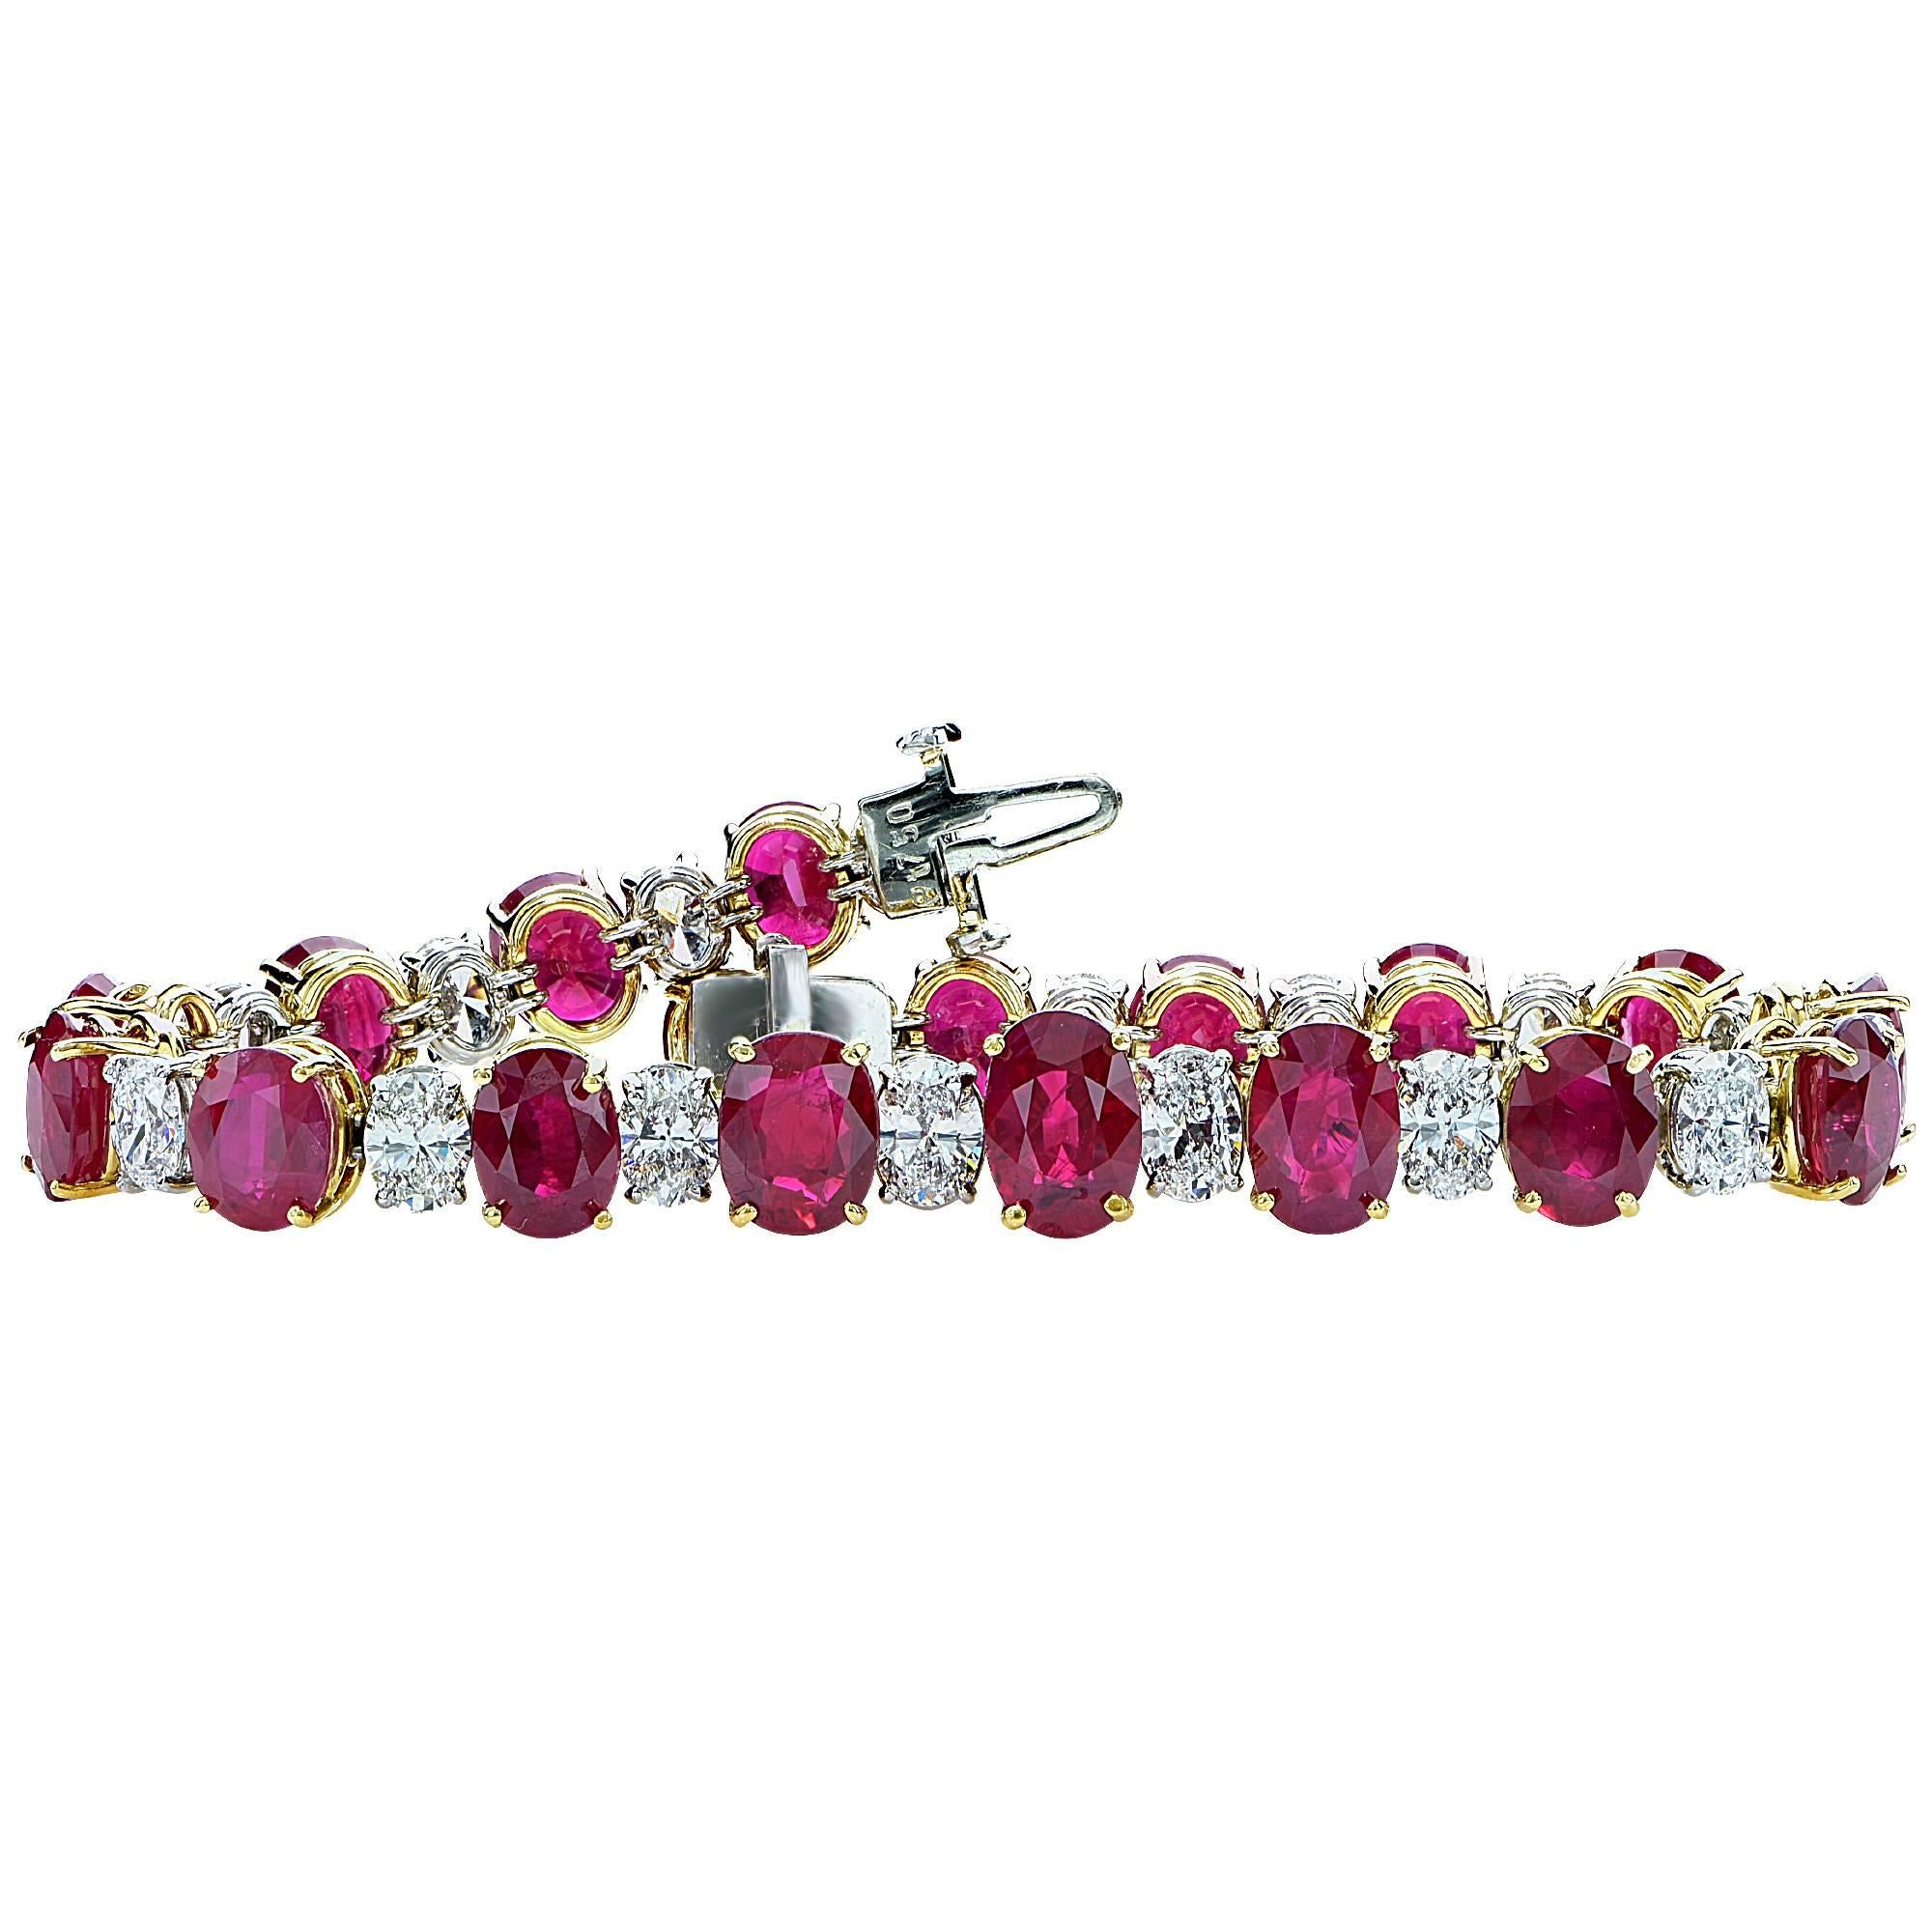 Platinum and 18k yellow gold bracelet featuring 18 AGL graded oval cut vibrant red Burma rubies weighing approximately 26cts total, accented by 18 oval cut diamonds weighing approximately 6.5cts total, F color VS clarity.

The bracelet is 7 inches